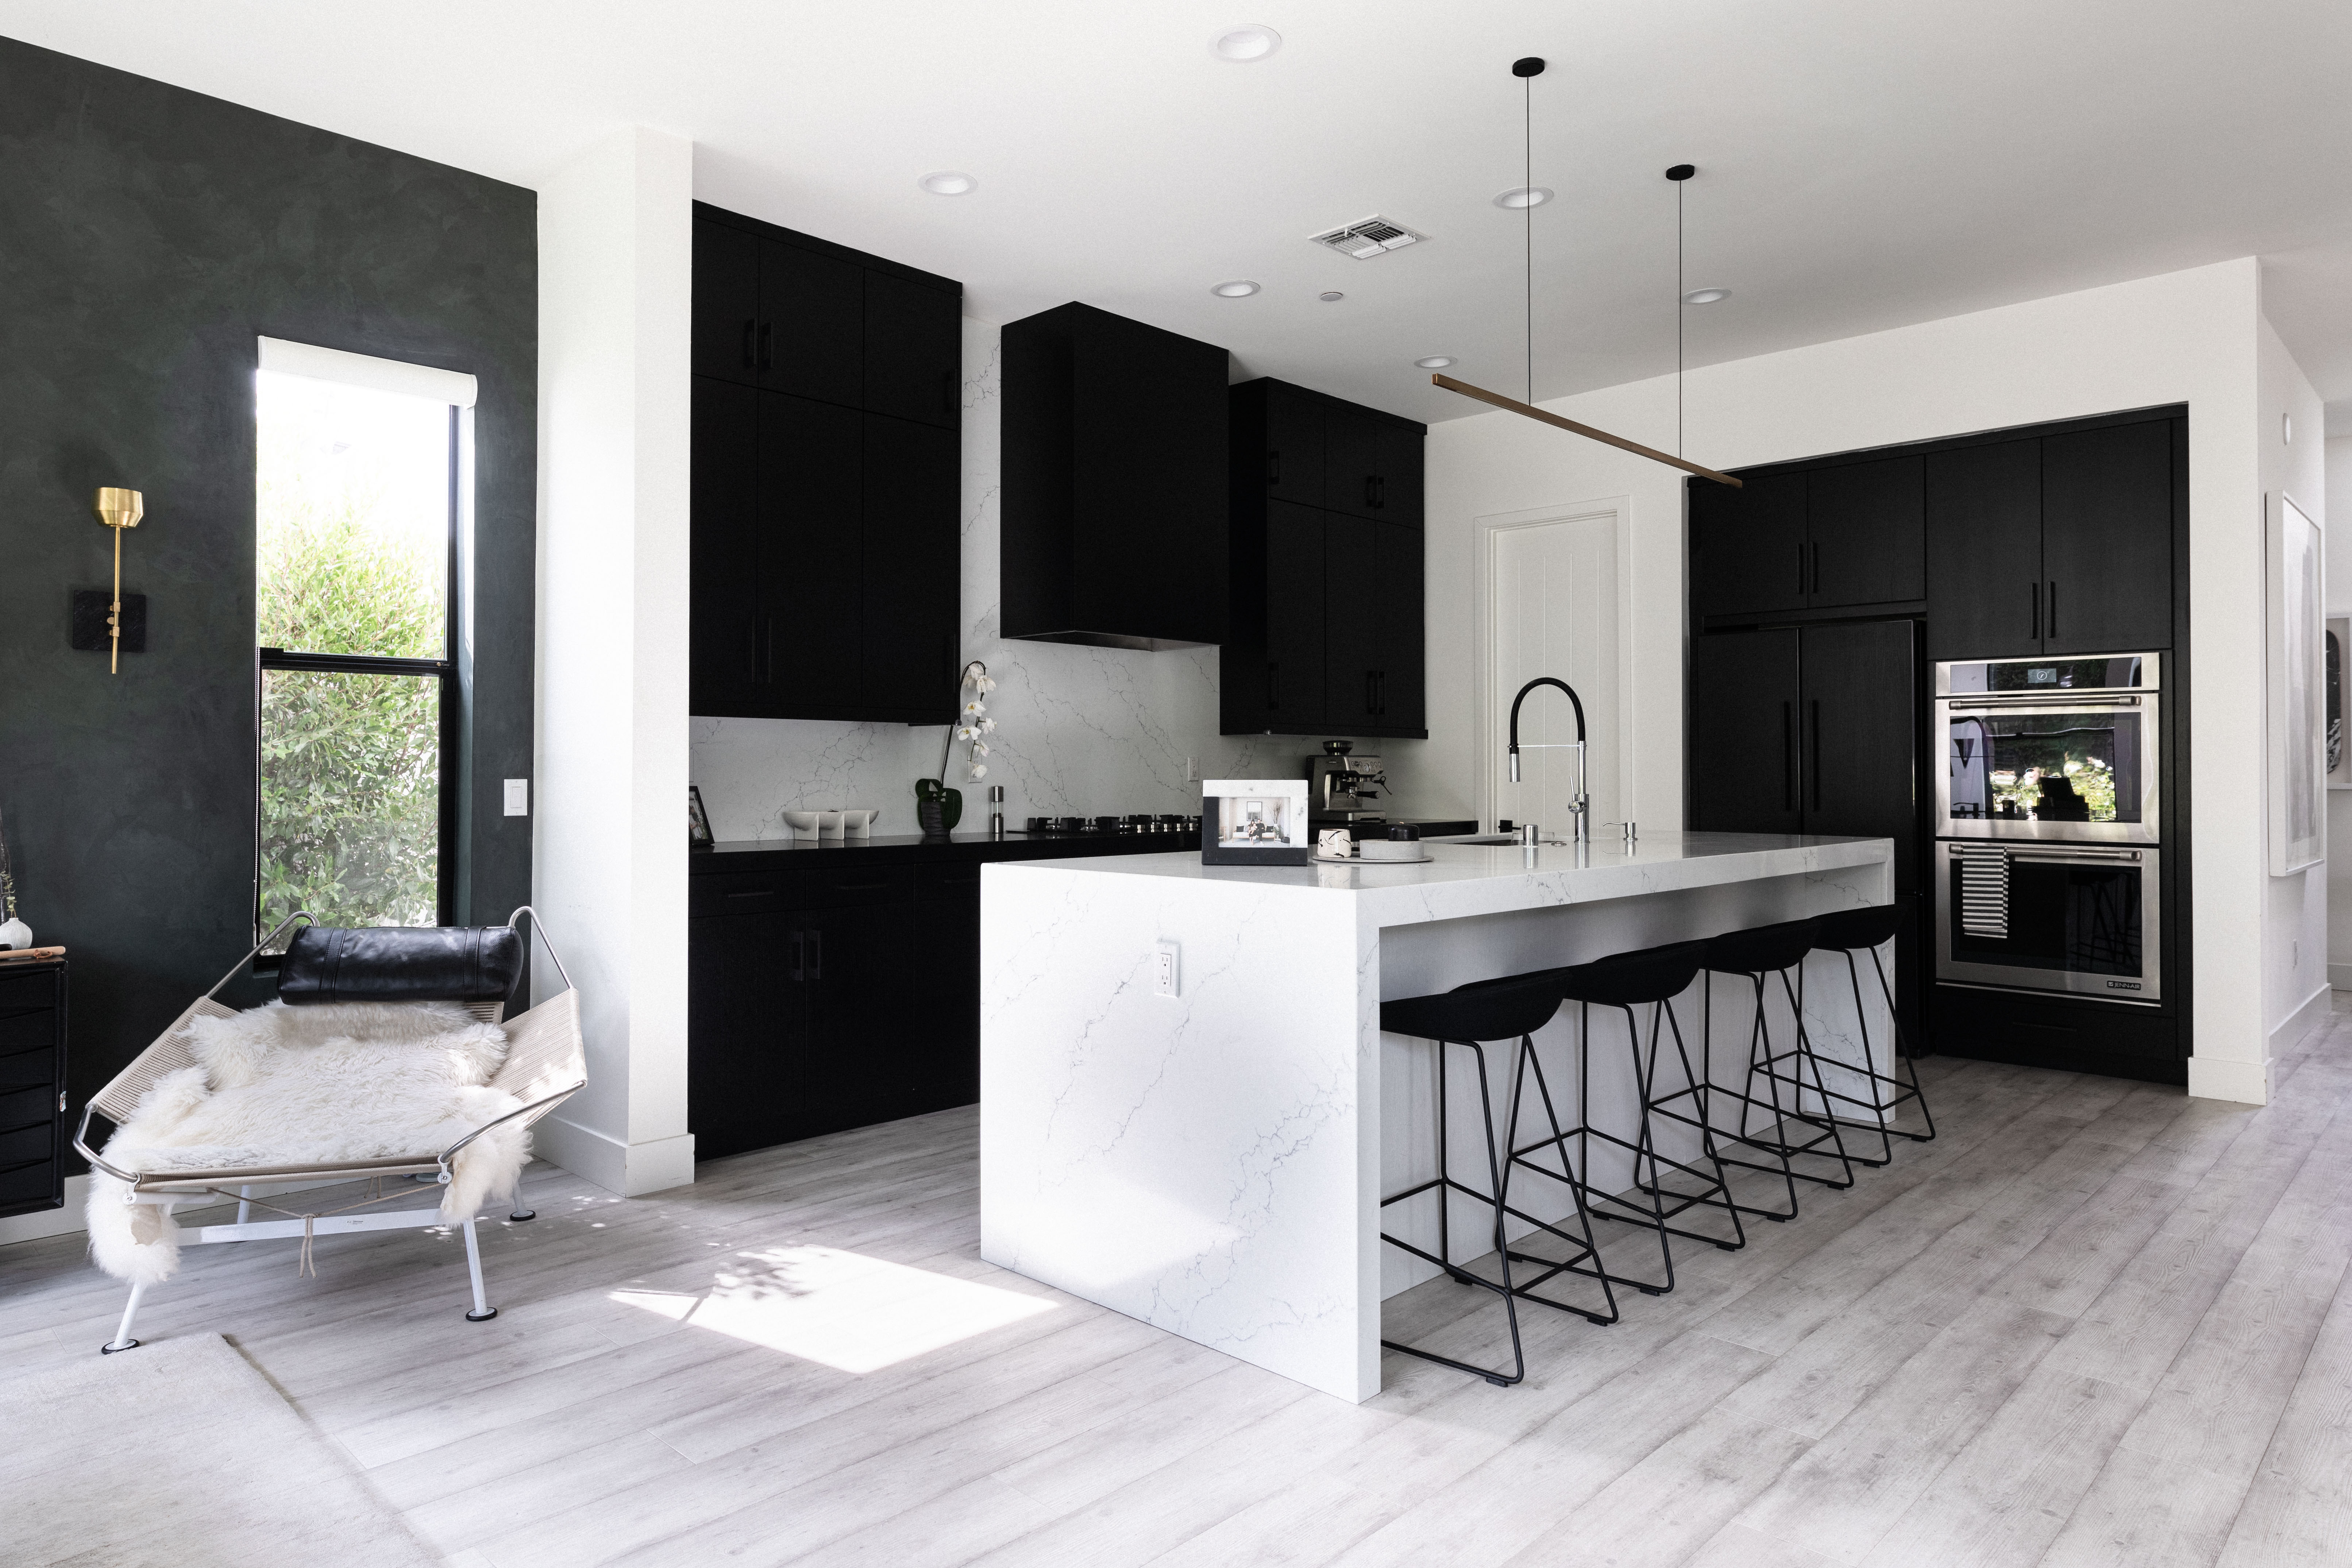 25 black-and-white kitchen ideas to take your cook space up a